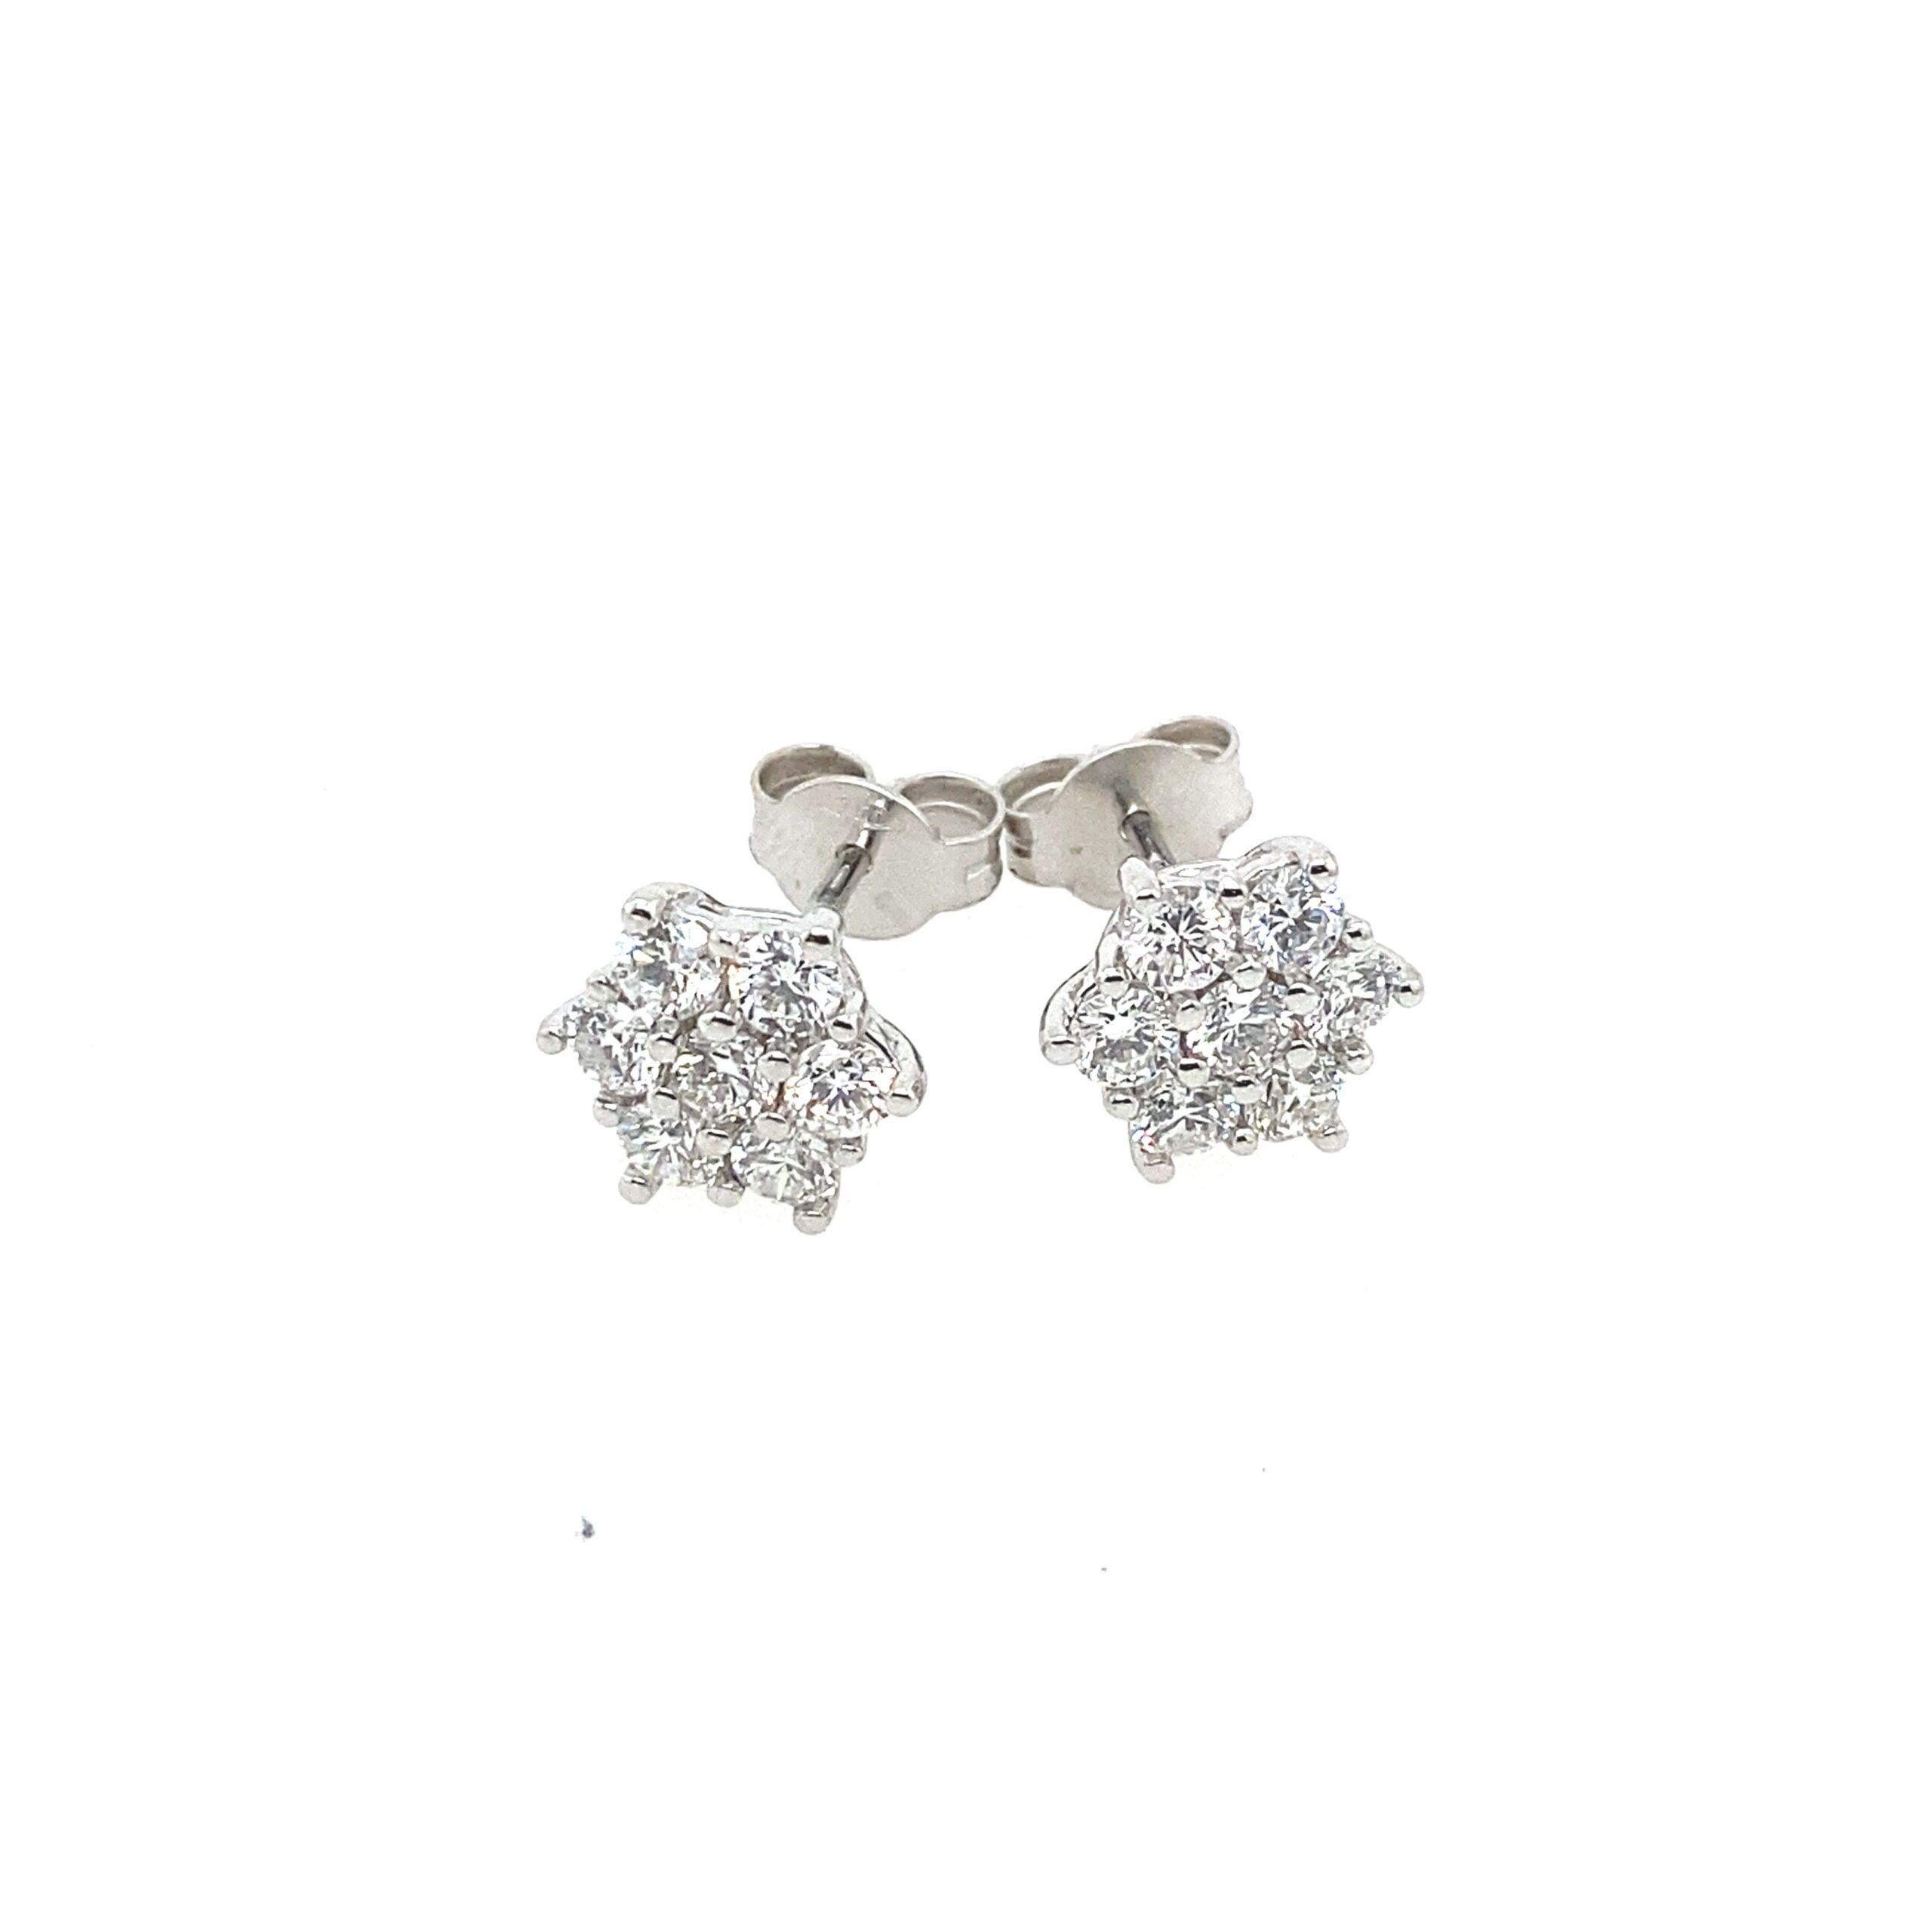 18ct White Gold Classic Cluster Earrings Set with 1.10ct G VS of Total Diamonds

Additional Information:
Total Diamond Weight: 1.10ct
Diamond Colour: G
Diamond Clarity: VS
Total  Weight: 2.9g
Earring Size: 9.78mm
SMS5345